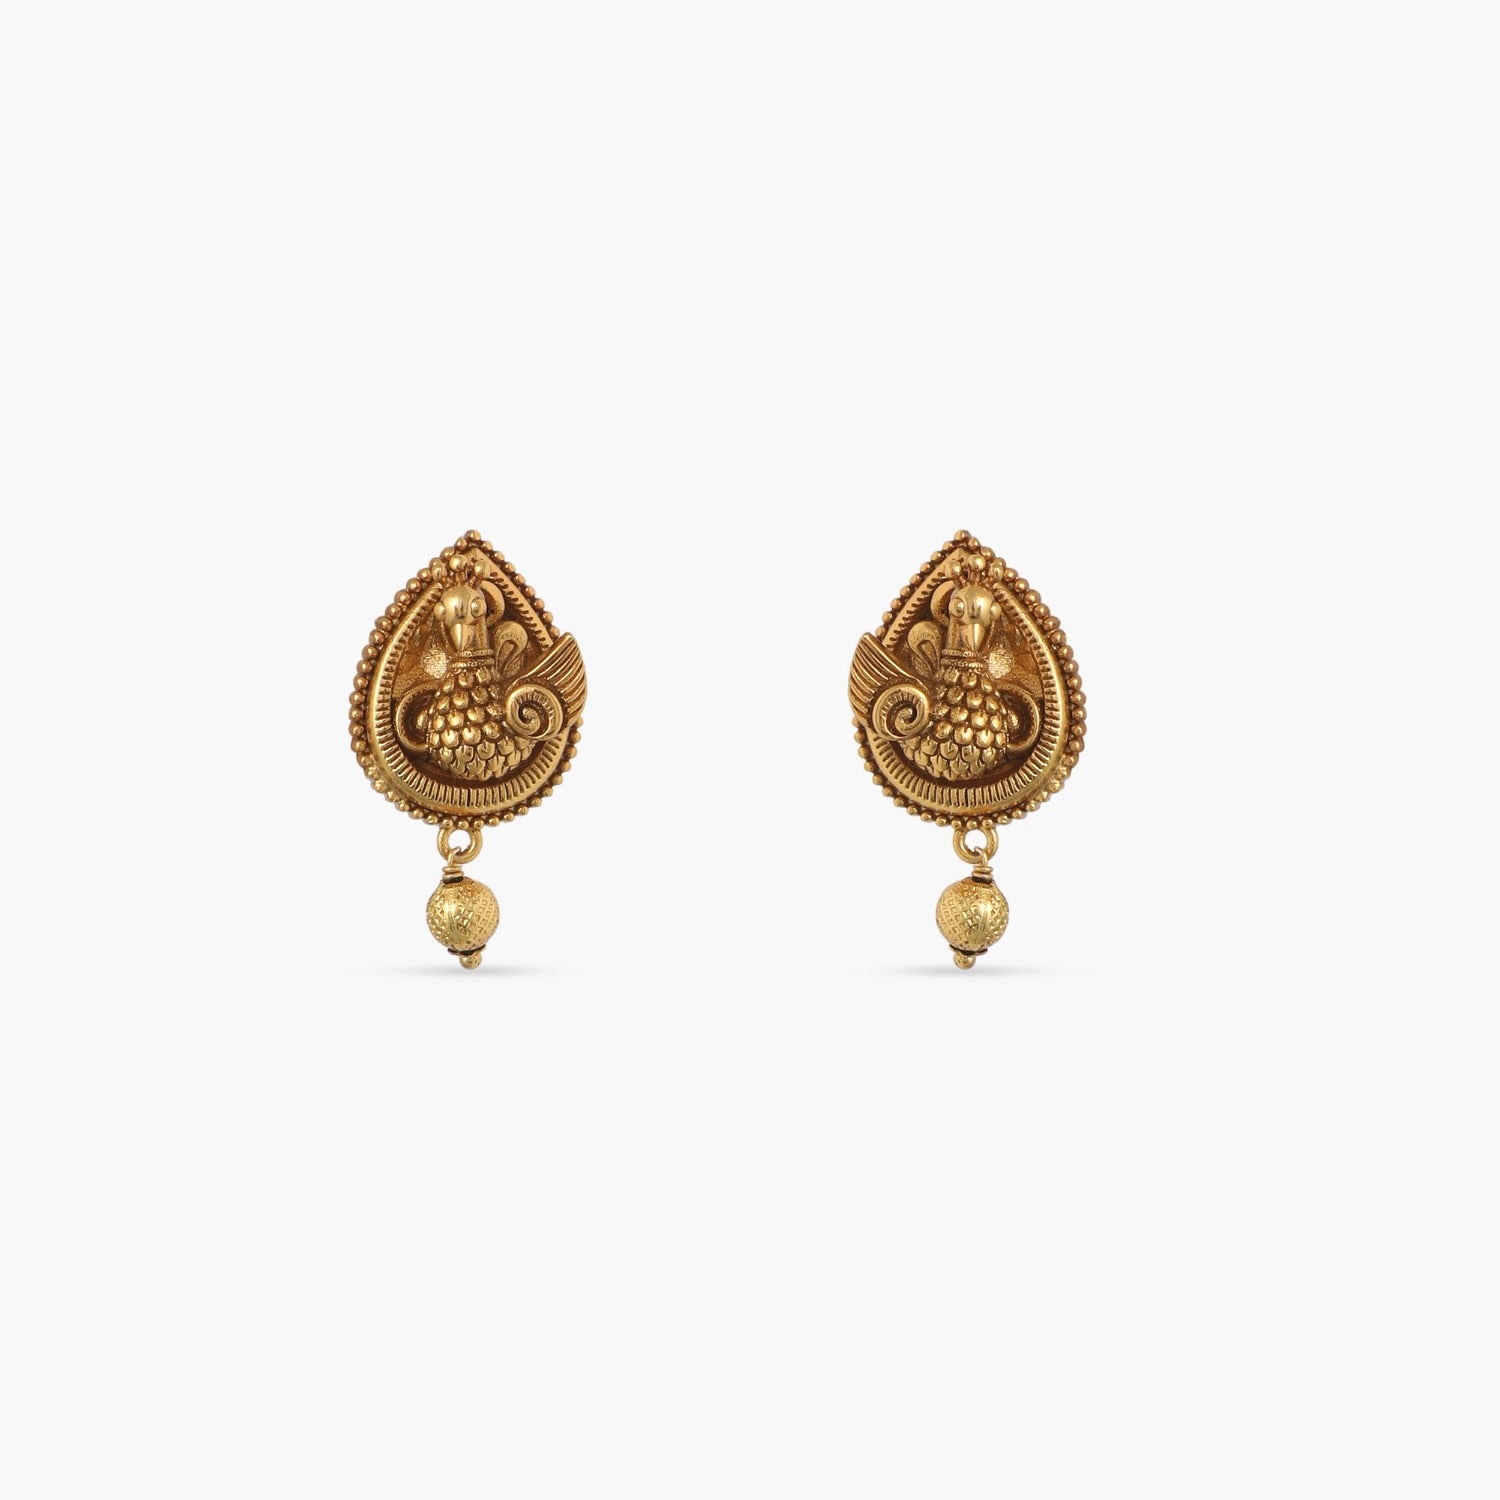 Buy Peruviana Bloom Earrings In Antique Gold Plated 925 Silver from Shaya  by CaratLane